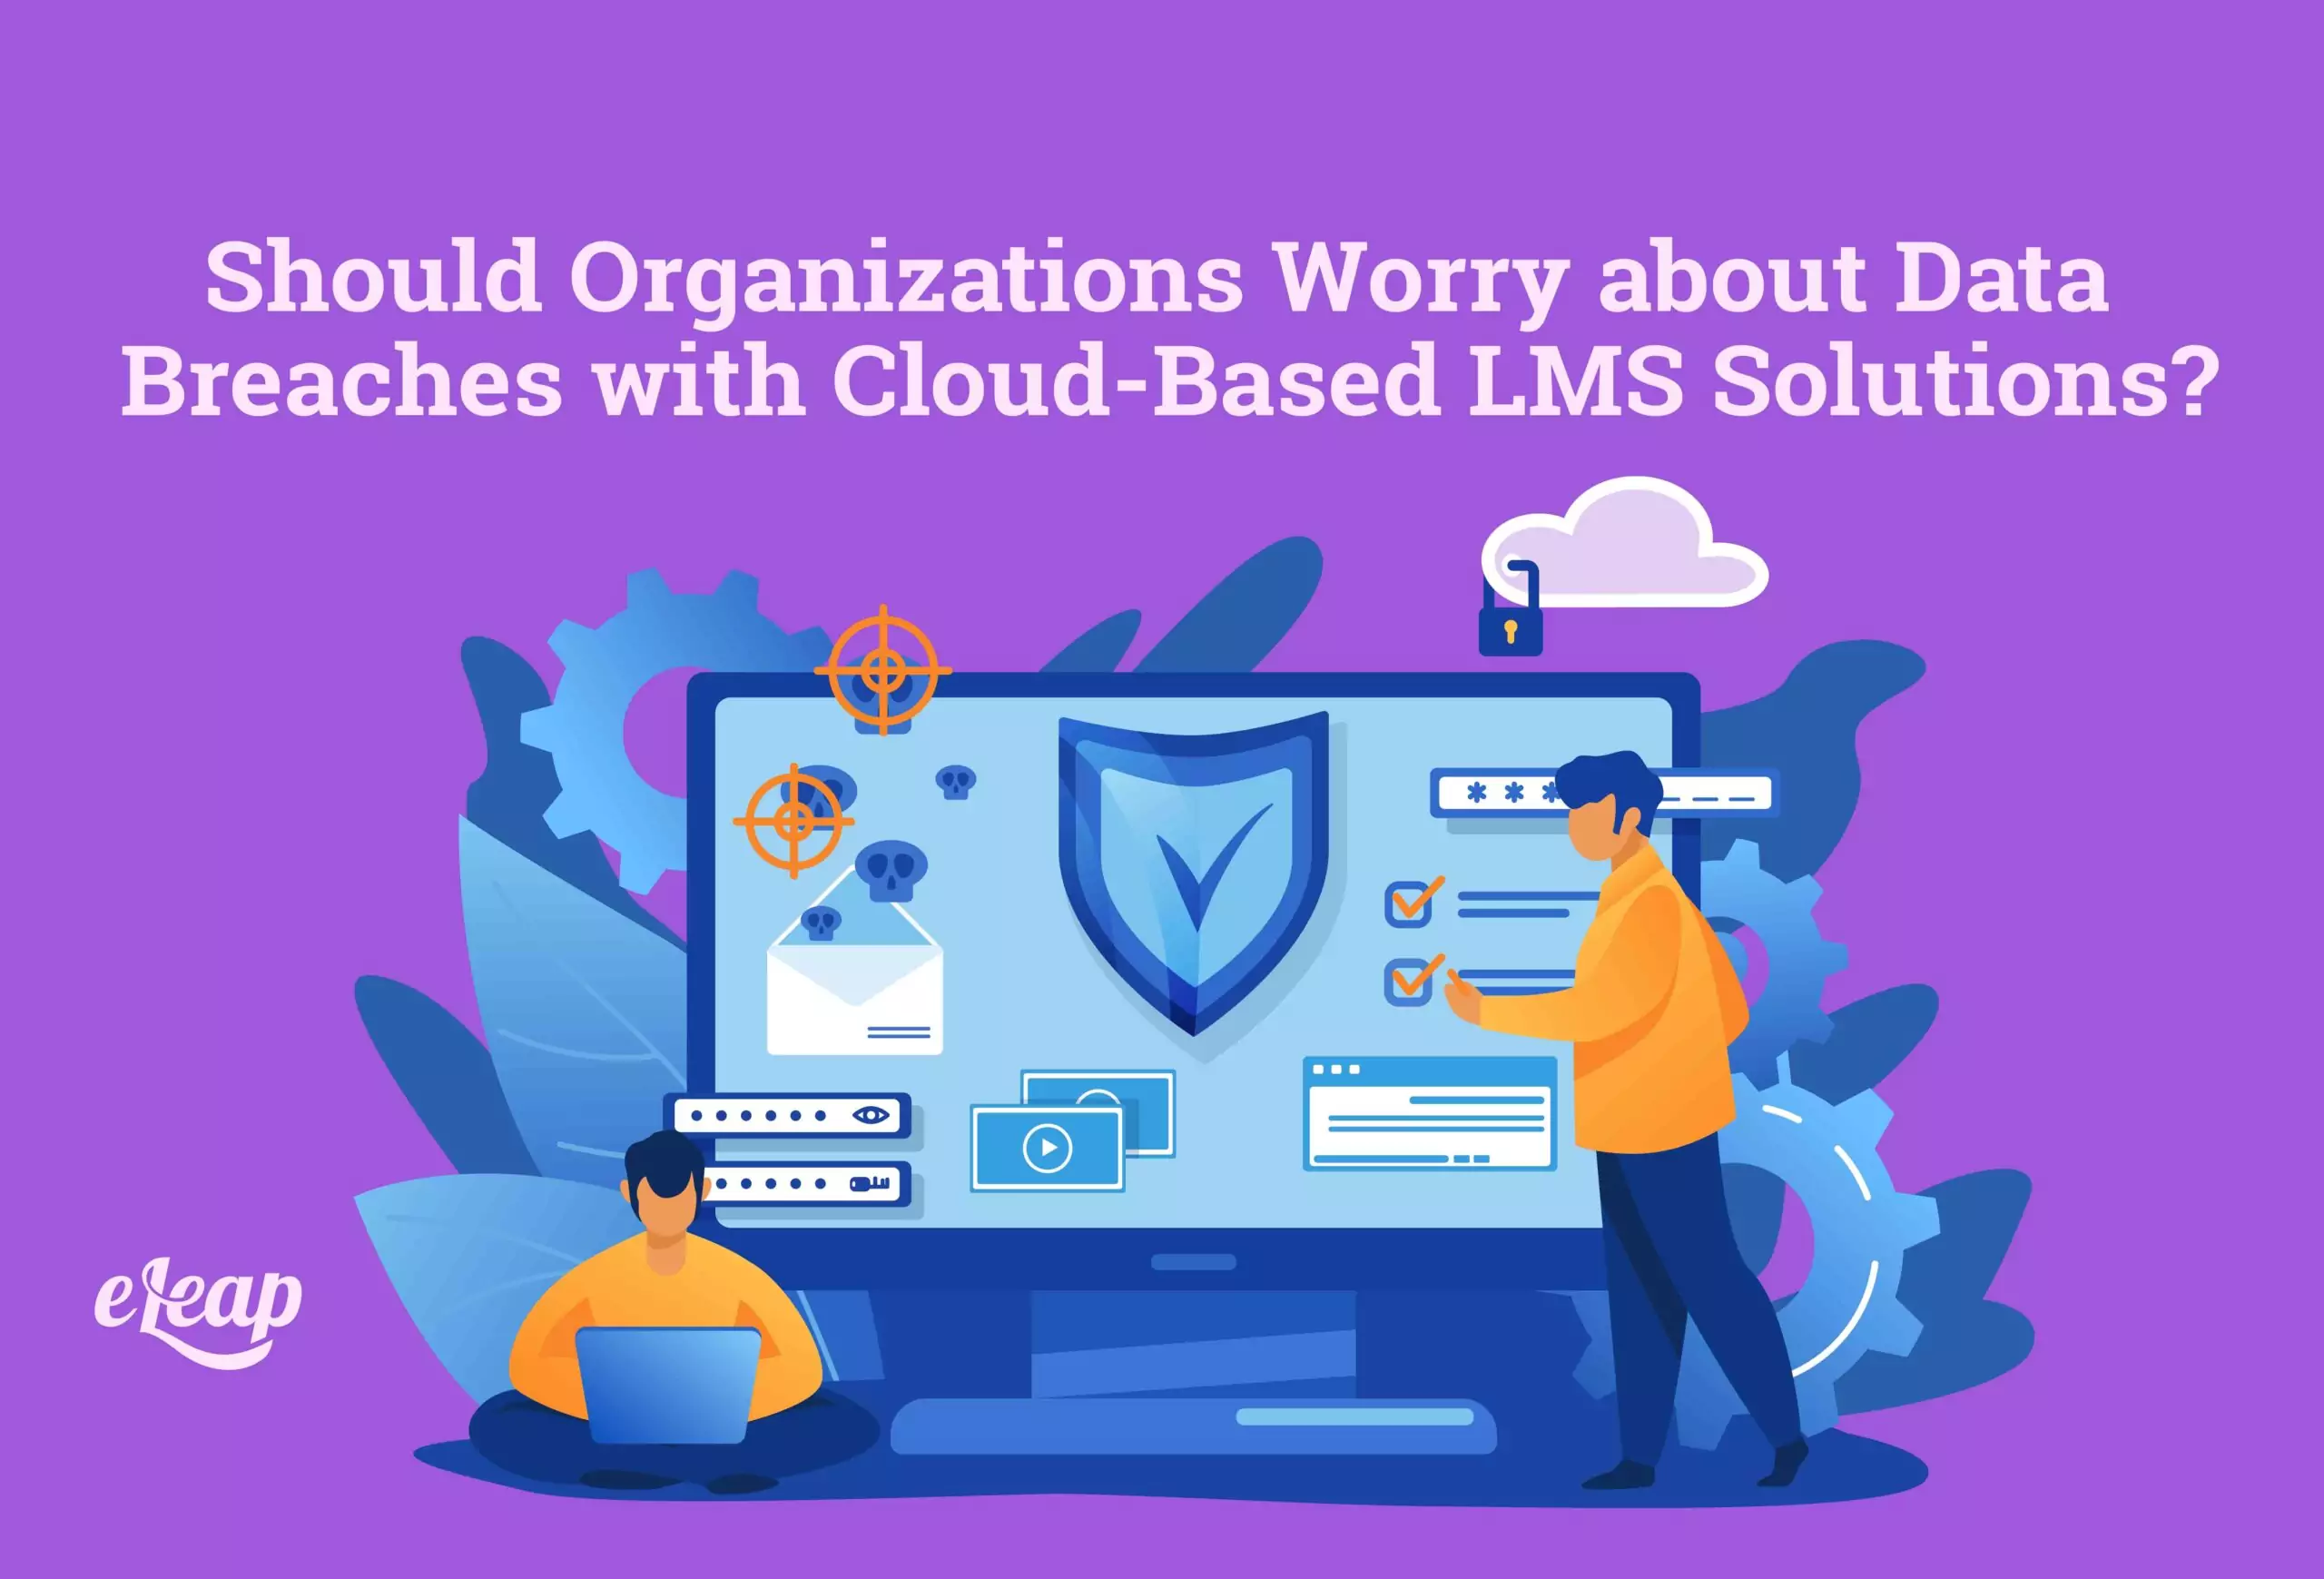 Should Organizations Worry about Data Breaches with Cloud-Based LMS Solutions?